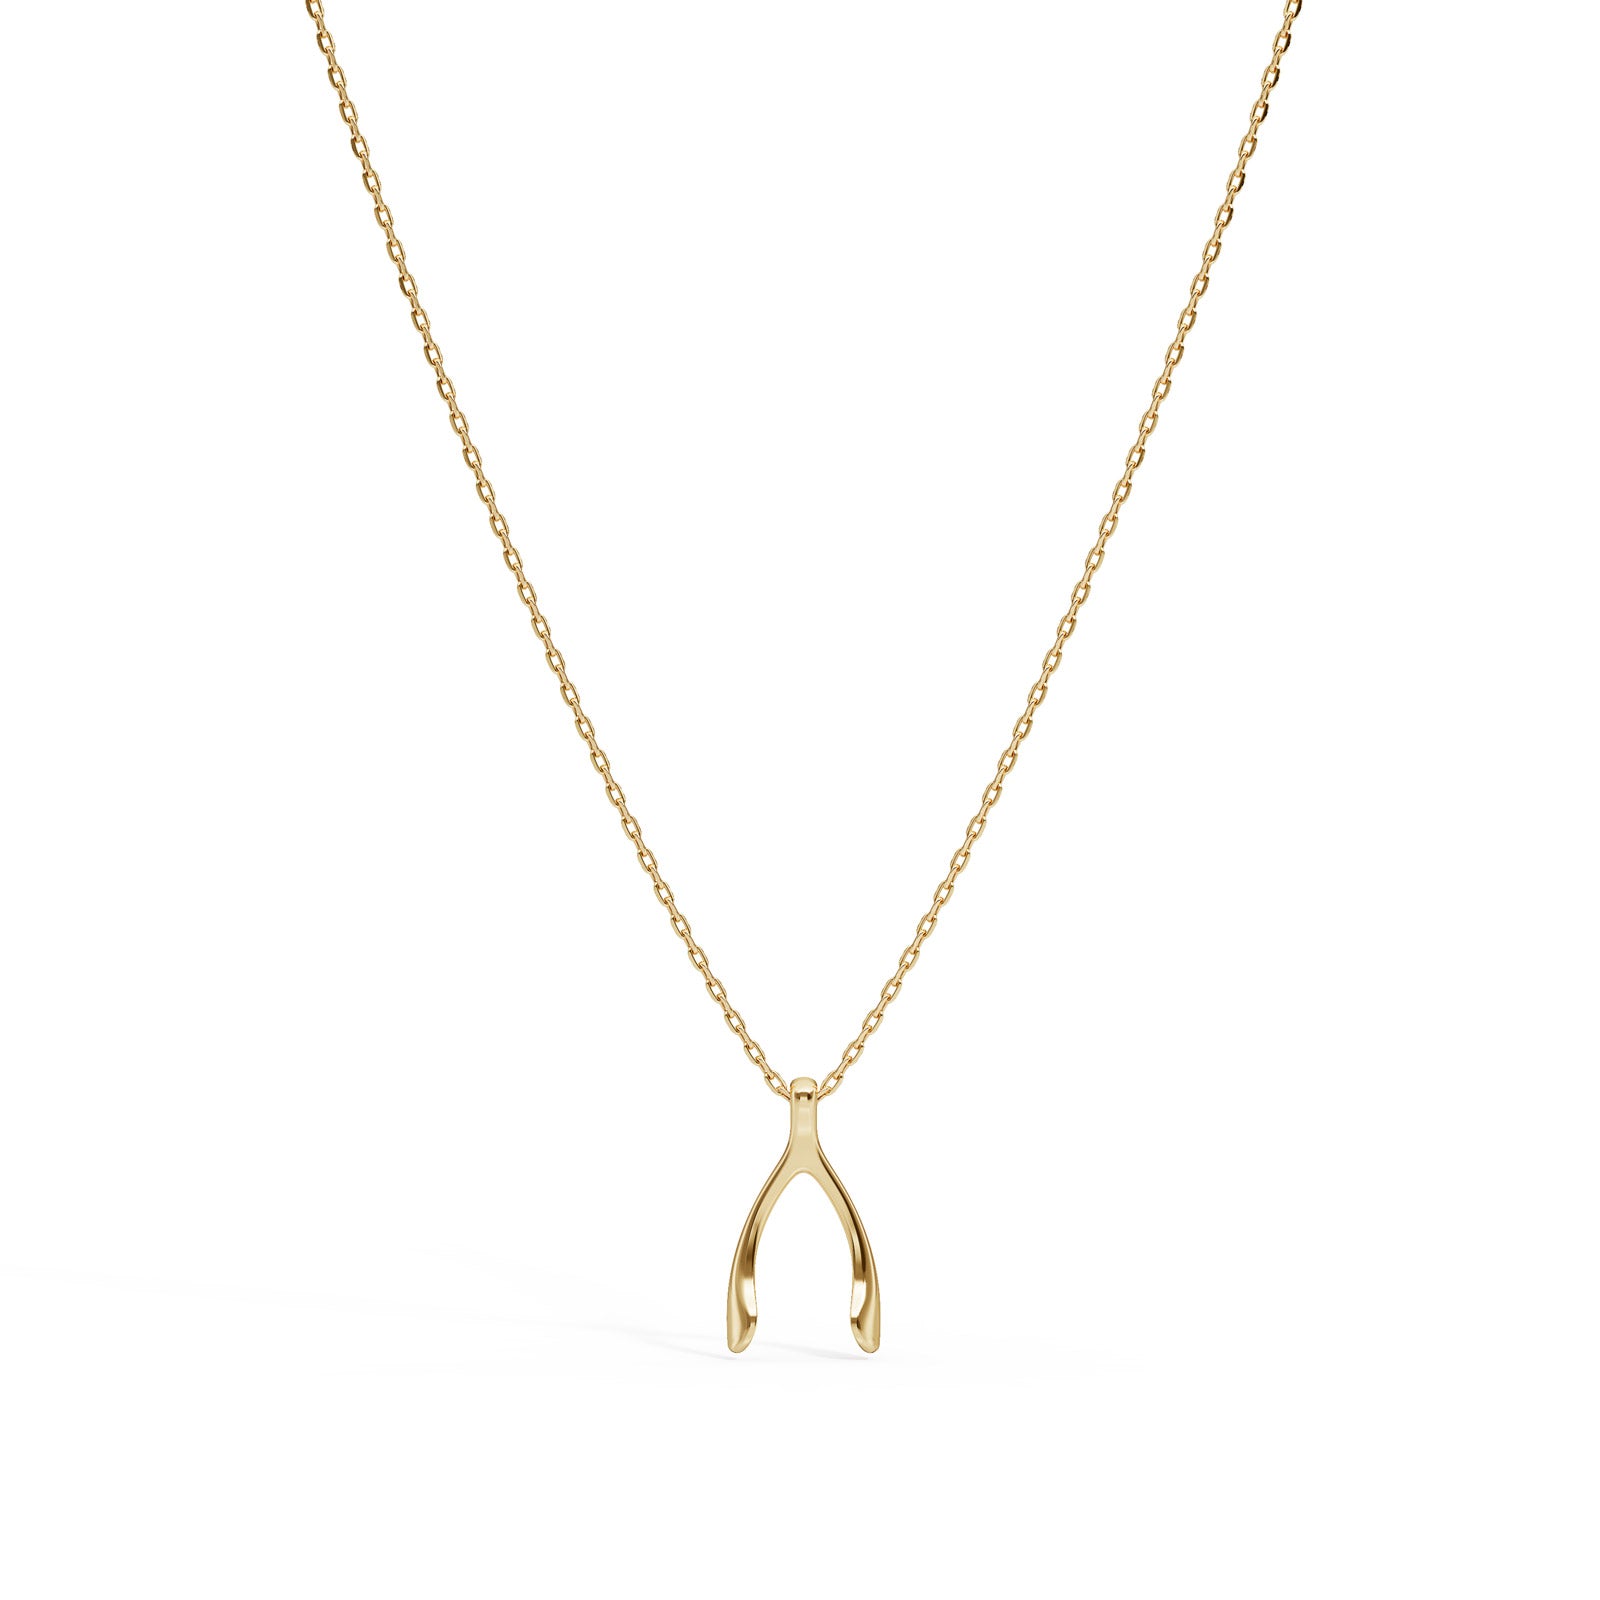 Wishbone Chain Necklace in 14K Yellow Gold